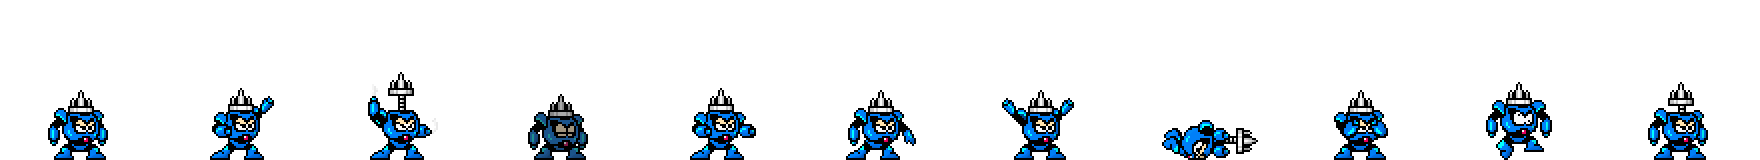 Needle Man | Base Sprite Right<div style="margin-top: 4px; letting-spacing: 1px; font-size: 90%; font-family: Courier New; color: rgb(159, 150, 172);">[robot:right:base]{needle-man}</div>